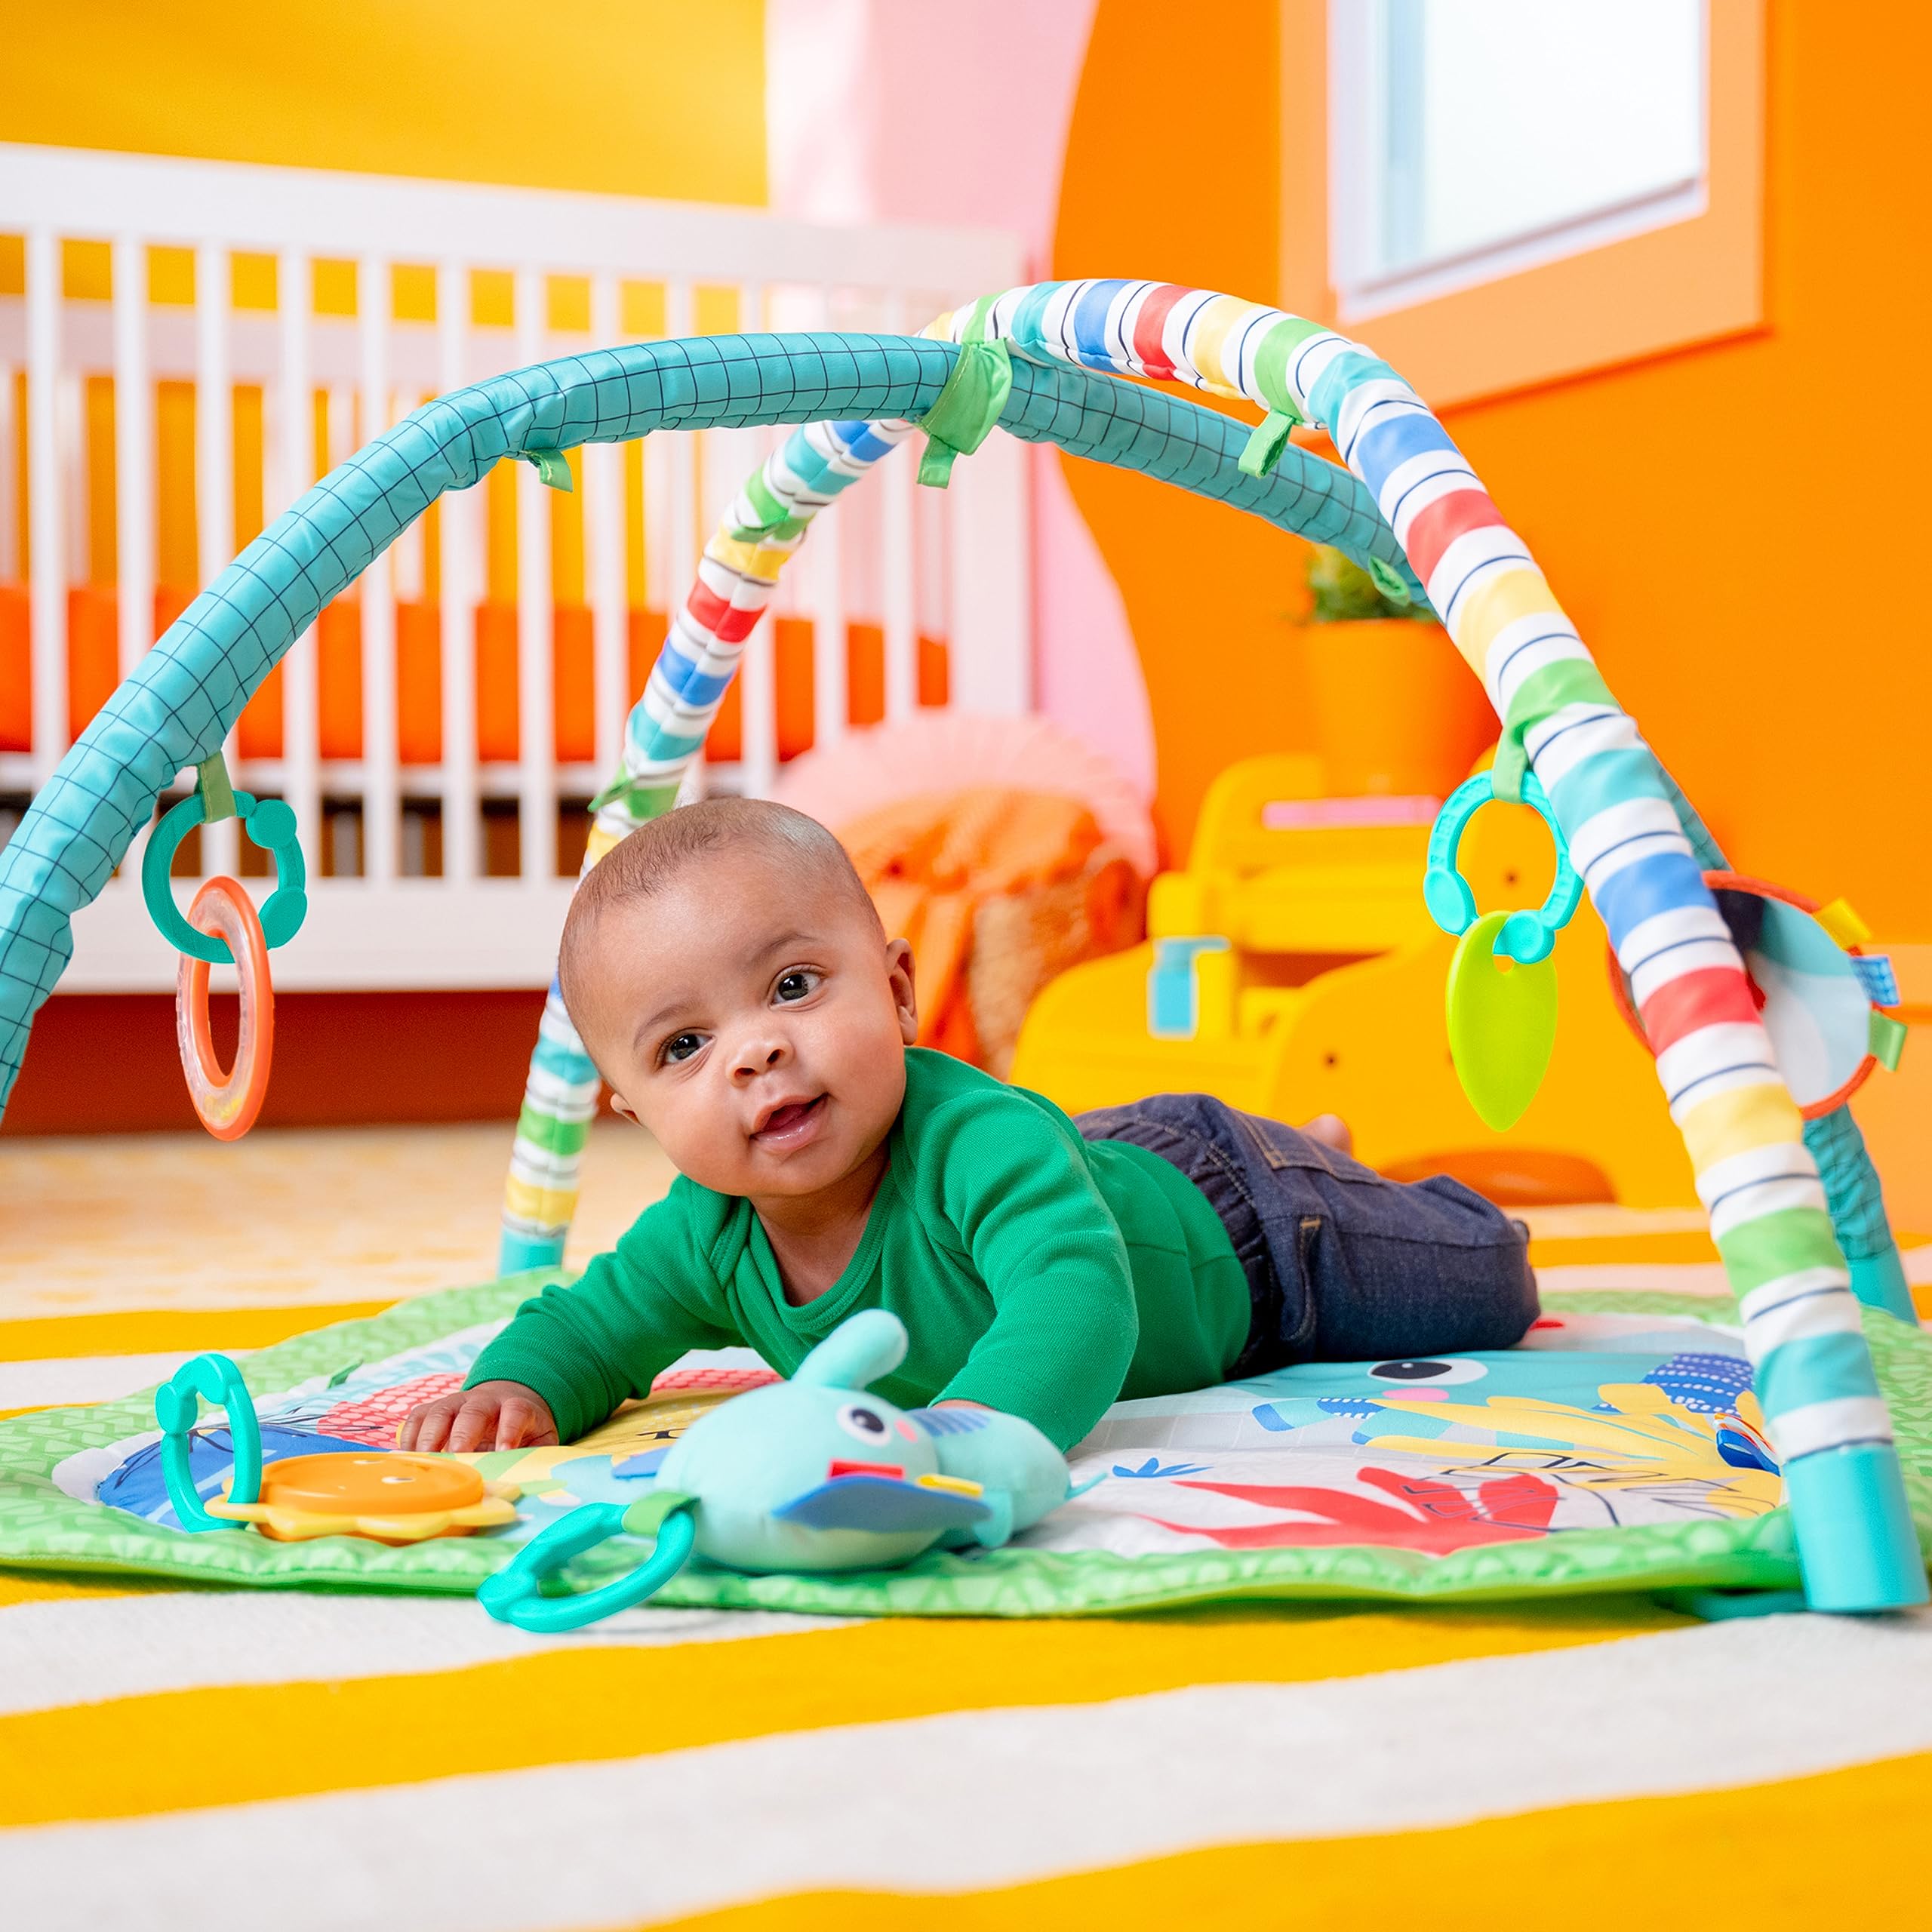 Bright Starts Wild Wiggles Baby Activity Gym & Play Mat with FoldingToy bar, Newborn and up - Green, 18.5” x 29.1” x 29.1”